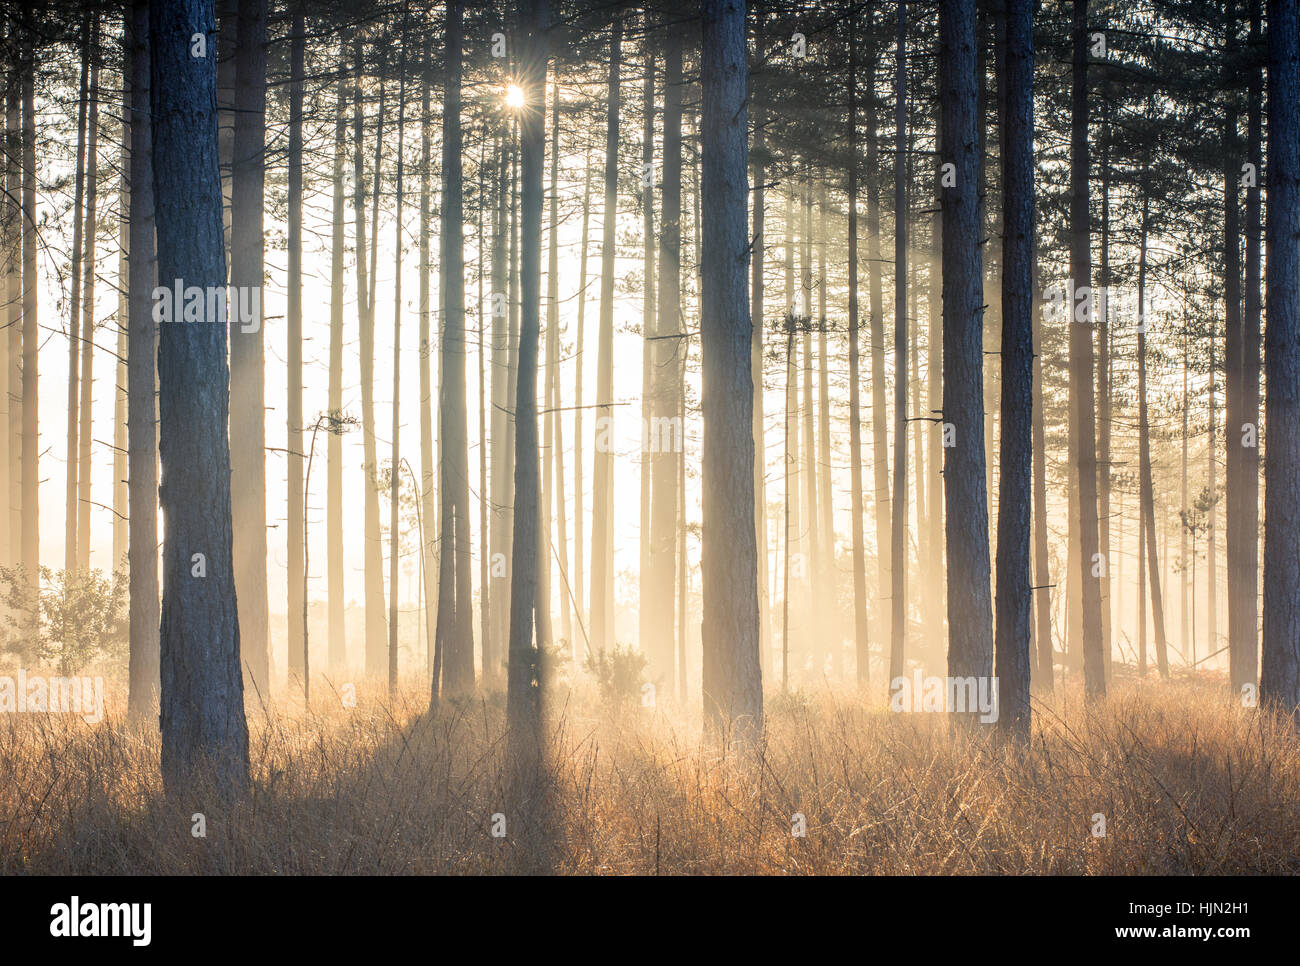 Beams of sunlight through pine forest Stock Photo